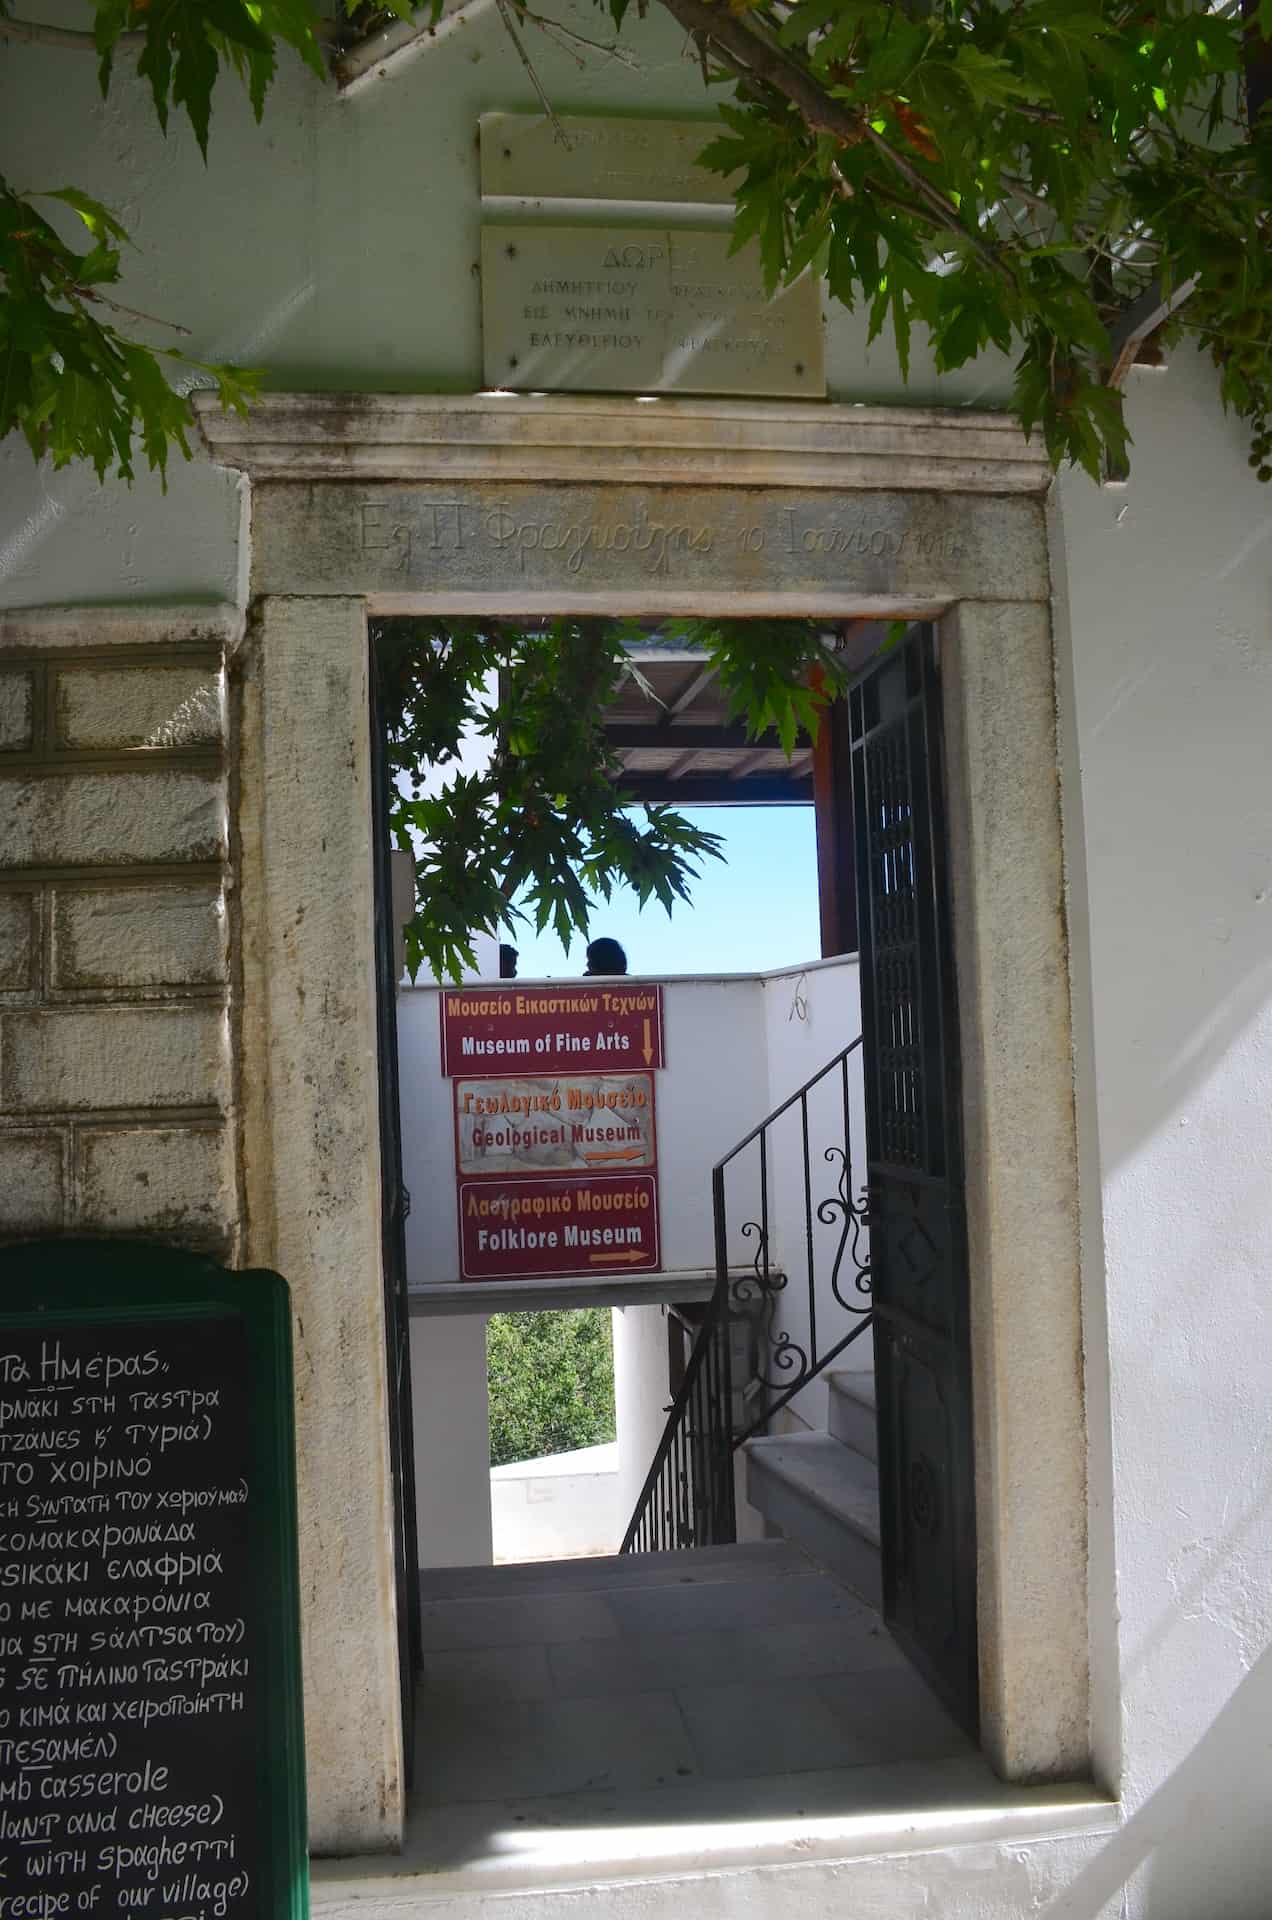 Entrance to the Museum of Fine Arts, Geological Museum, and Folklore Museum in Apeiranthos, Naxos